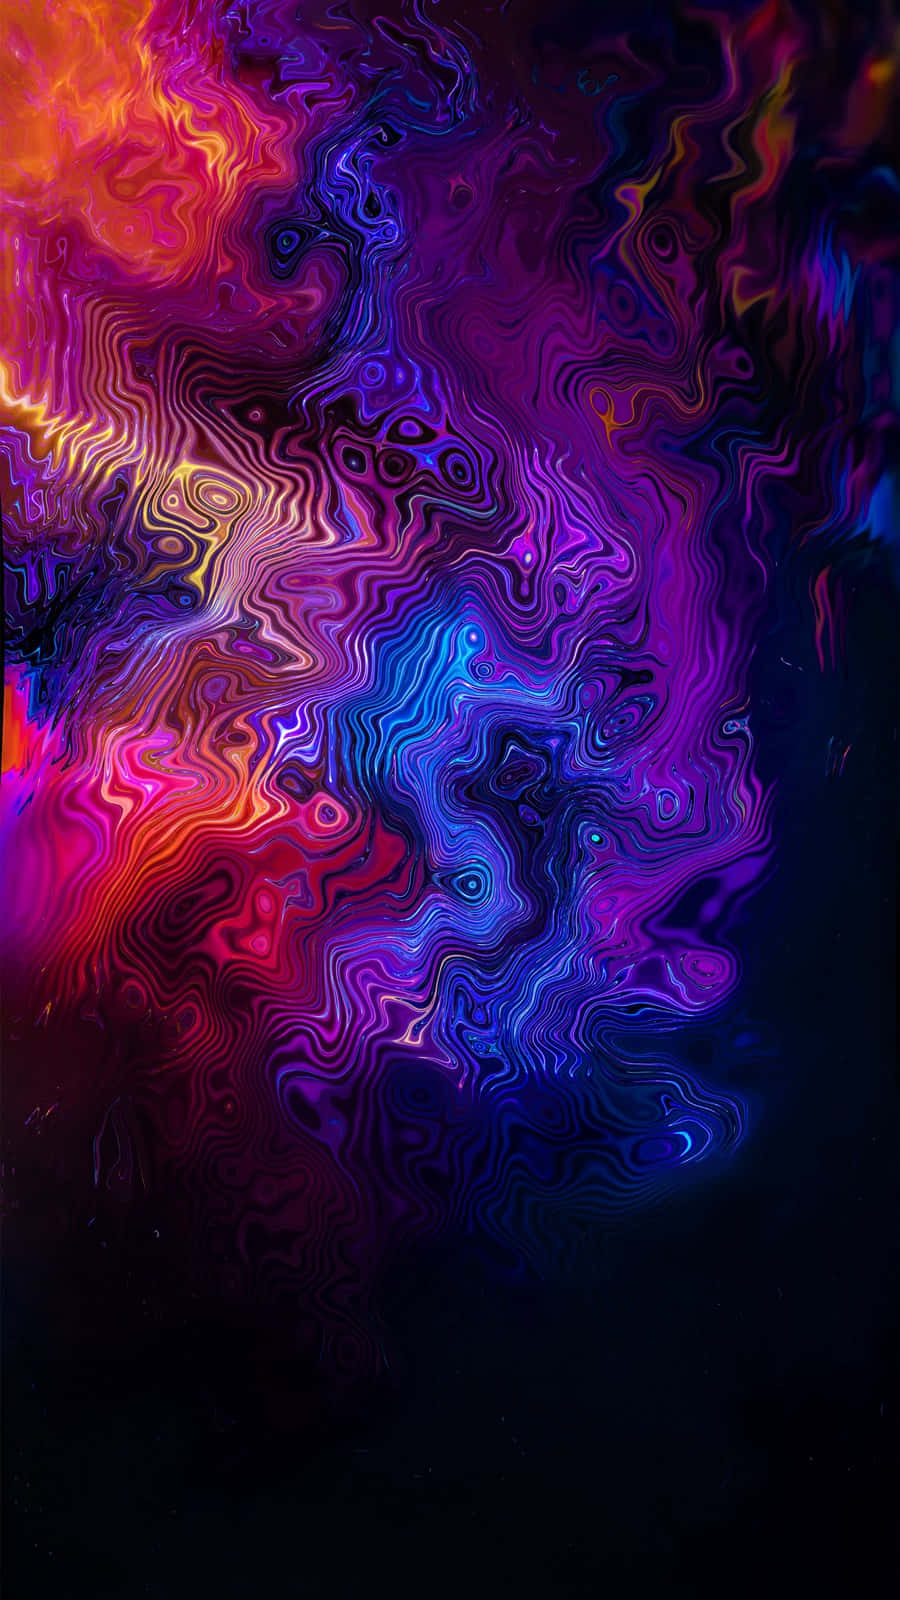 Color Phone wallpaper featuring multicolored abstract design on a black background Wallpaper